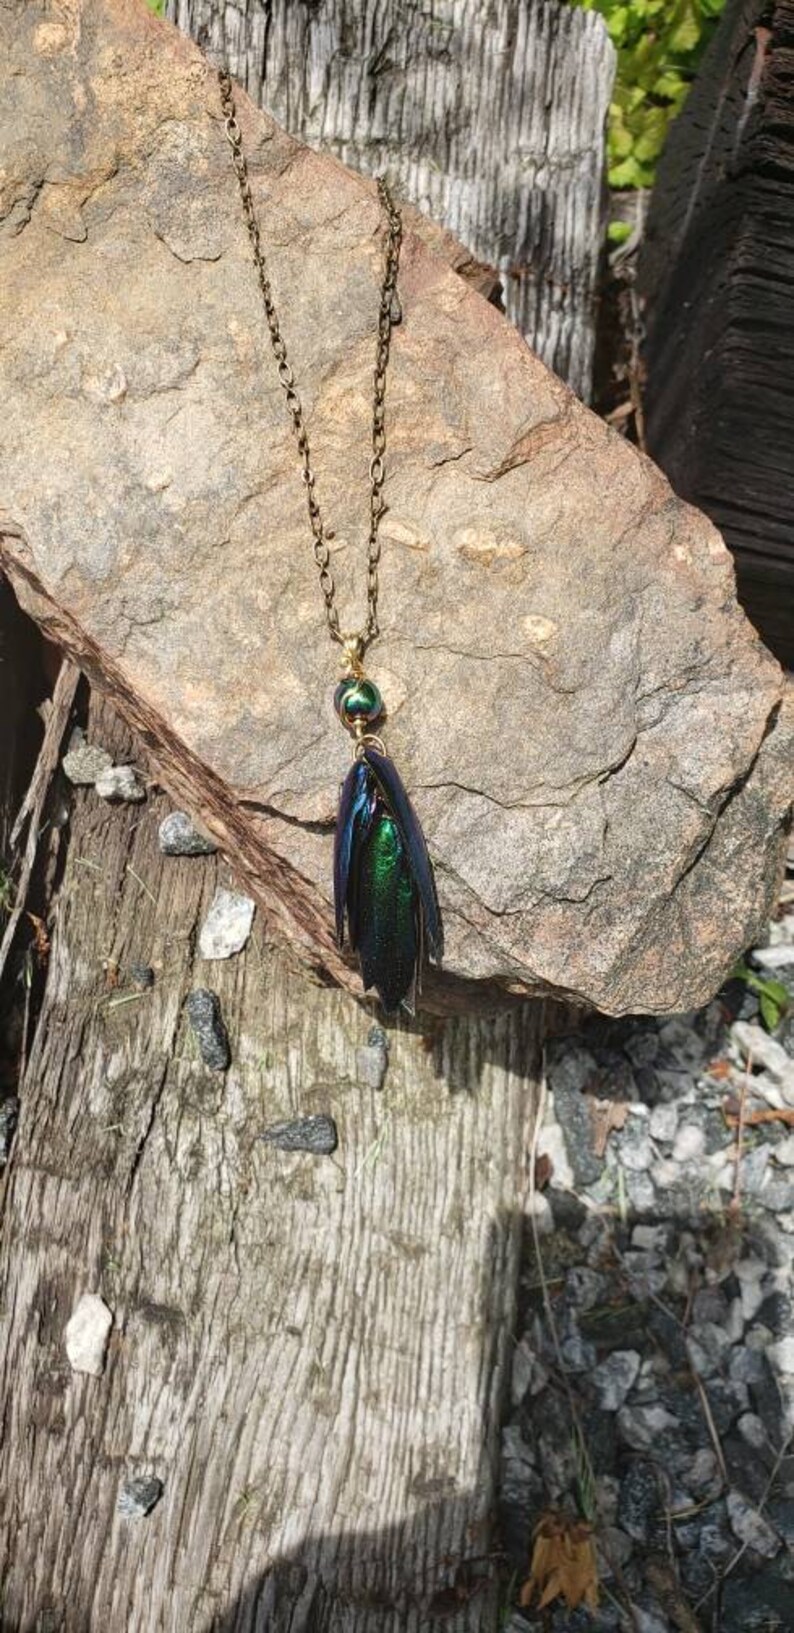 Beetle wing, emerald green, antique brass, necklace, natural, insect, irridescent, jewel beetle, necklace, pendant, transformation image 6